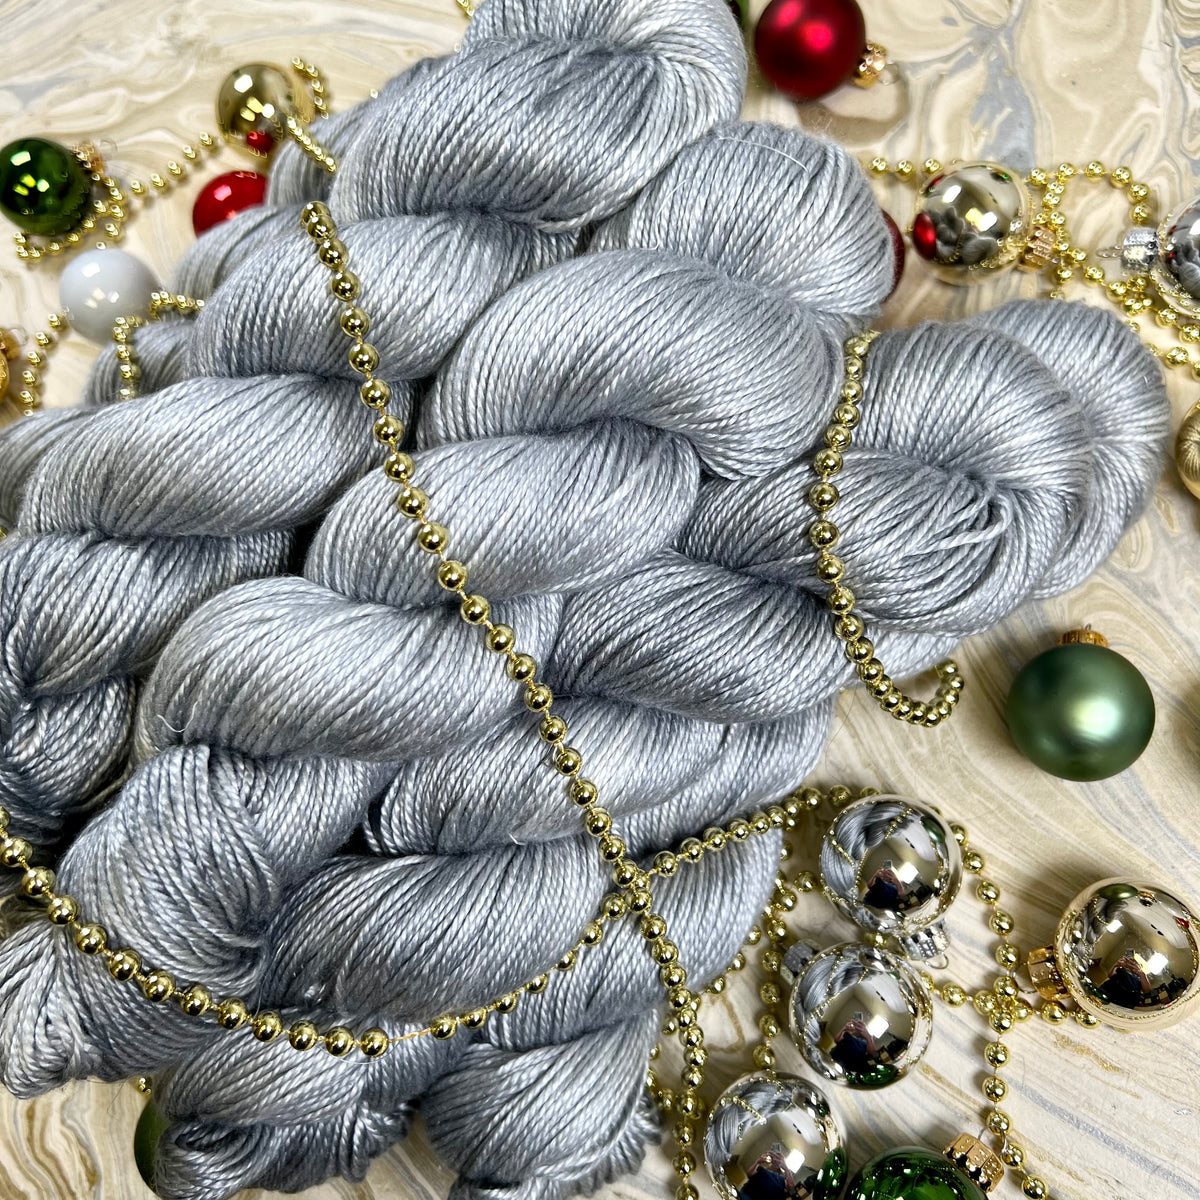 Day 5 - Tinsel and Vintage - 100% Mulberry Silk DK